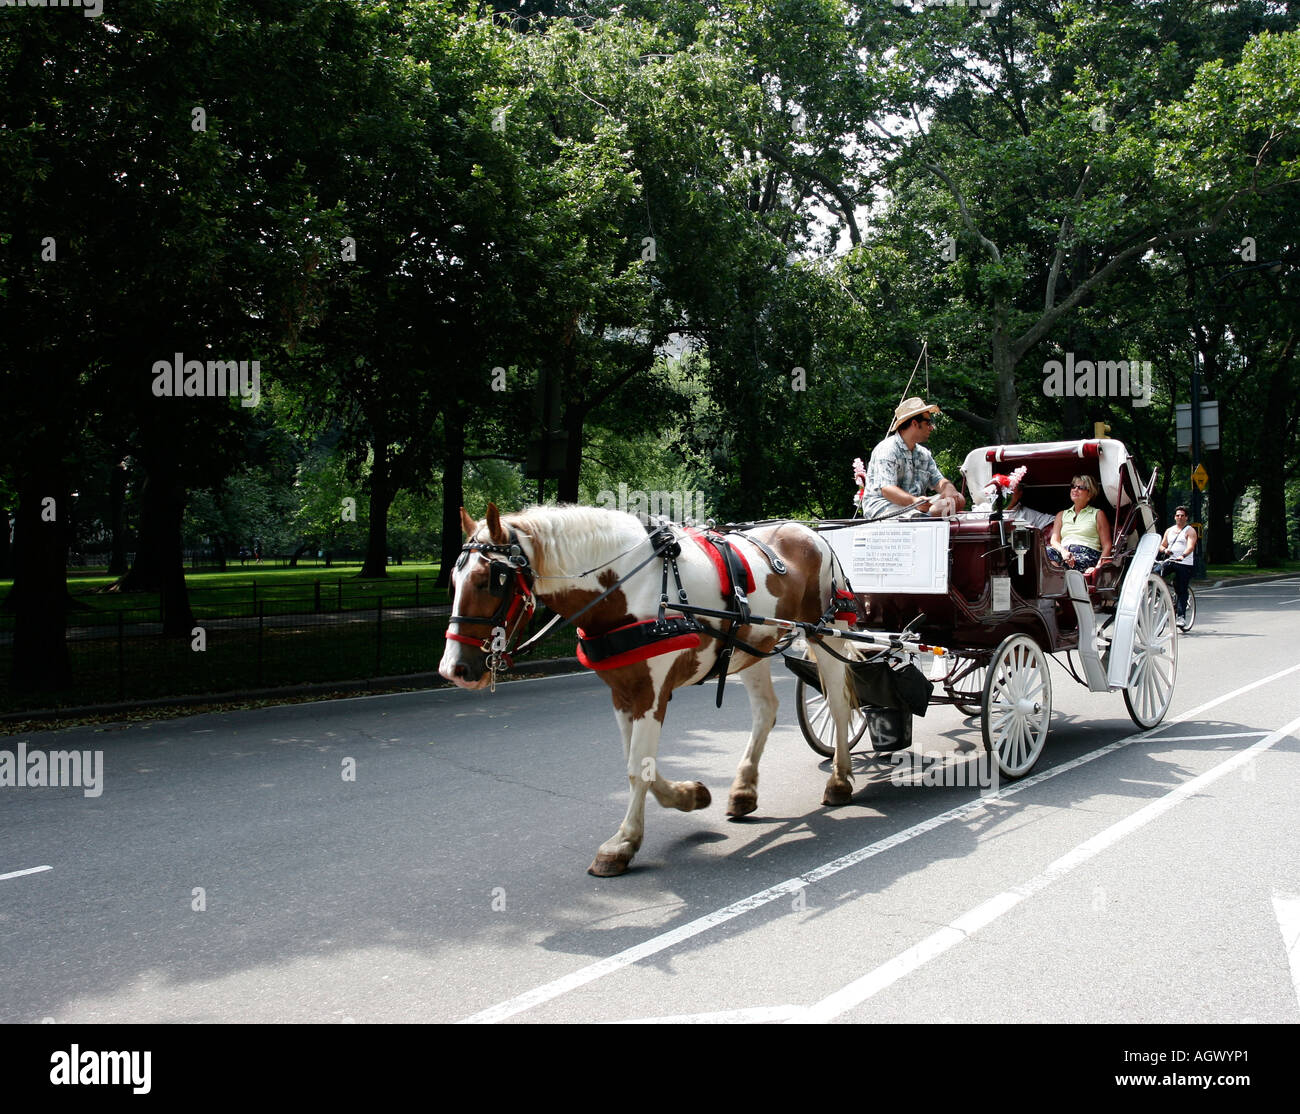 Horse drawn carriage in central park, Manhattan, New York, USA Stock Photo